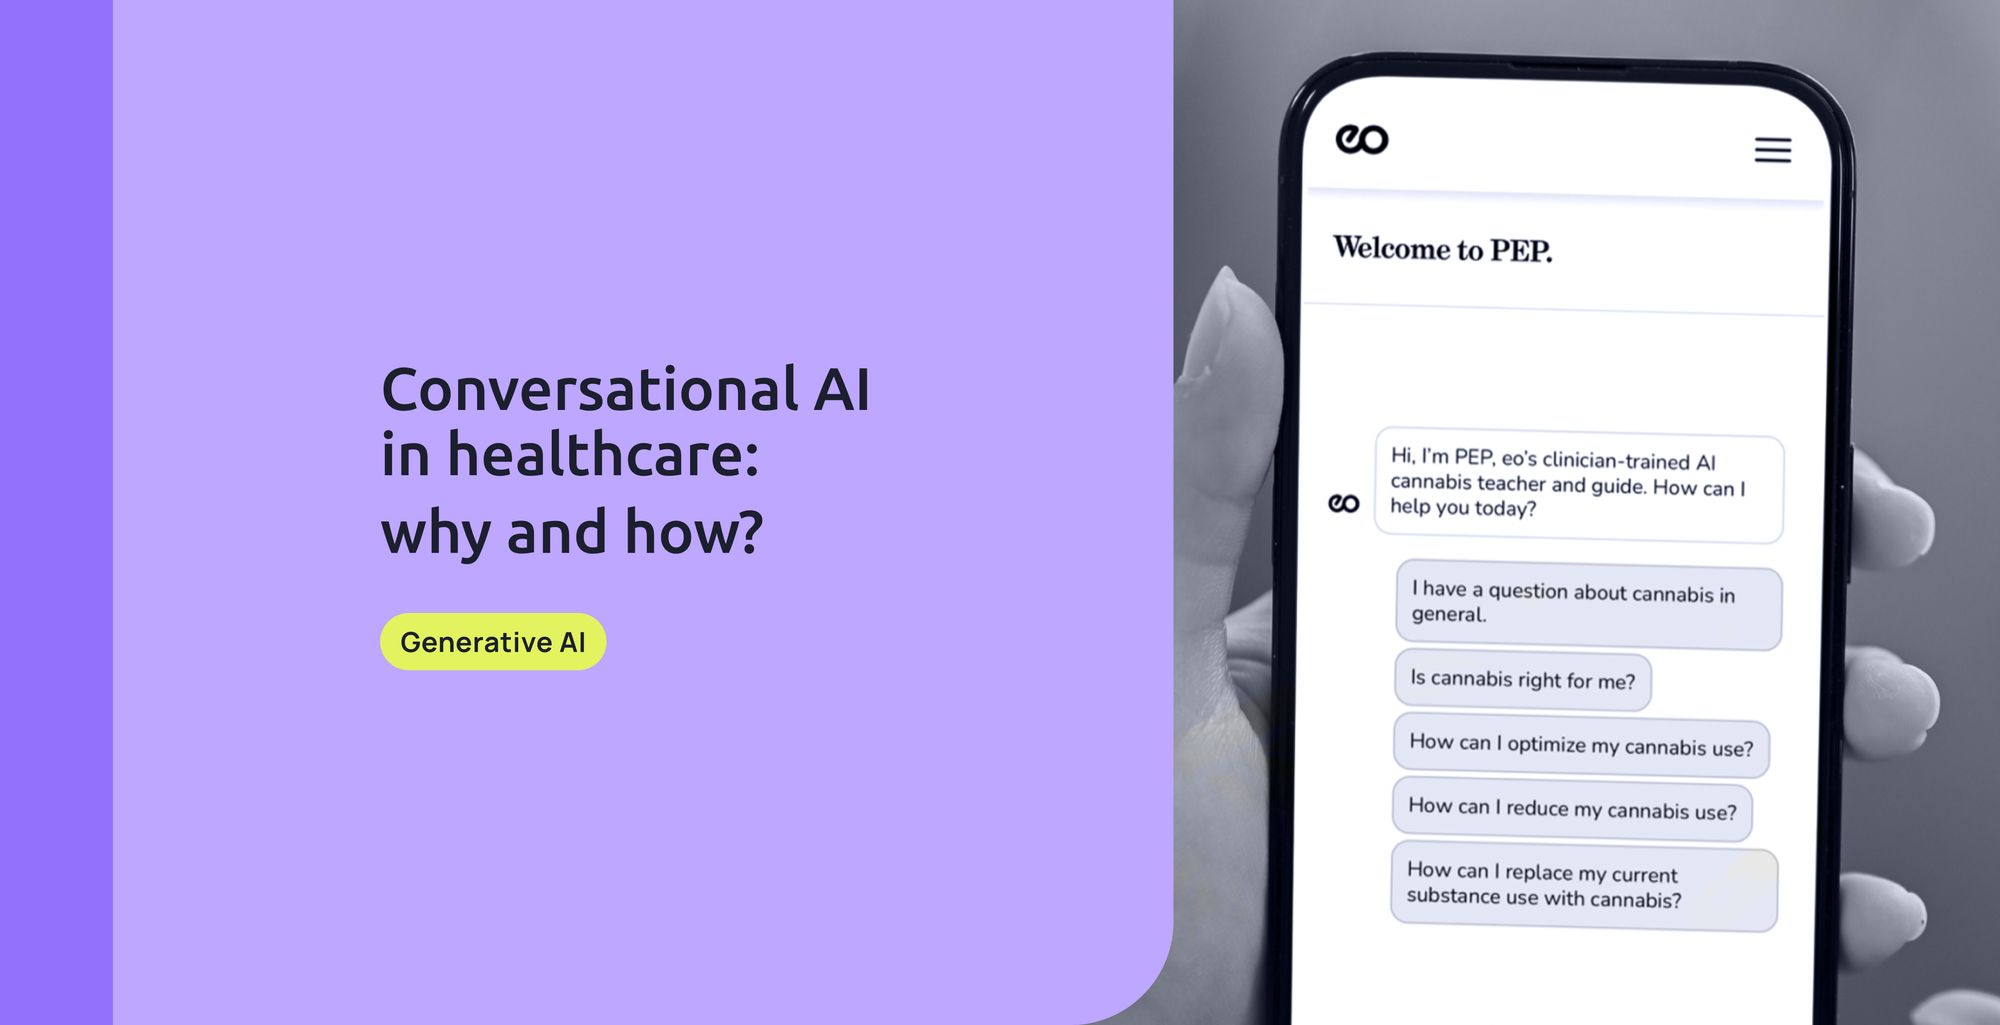 Conversational AI in healthcare: why and how?